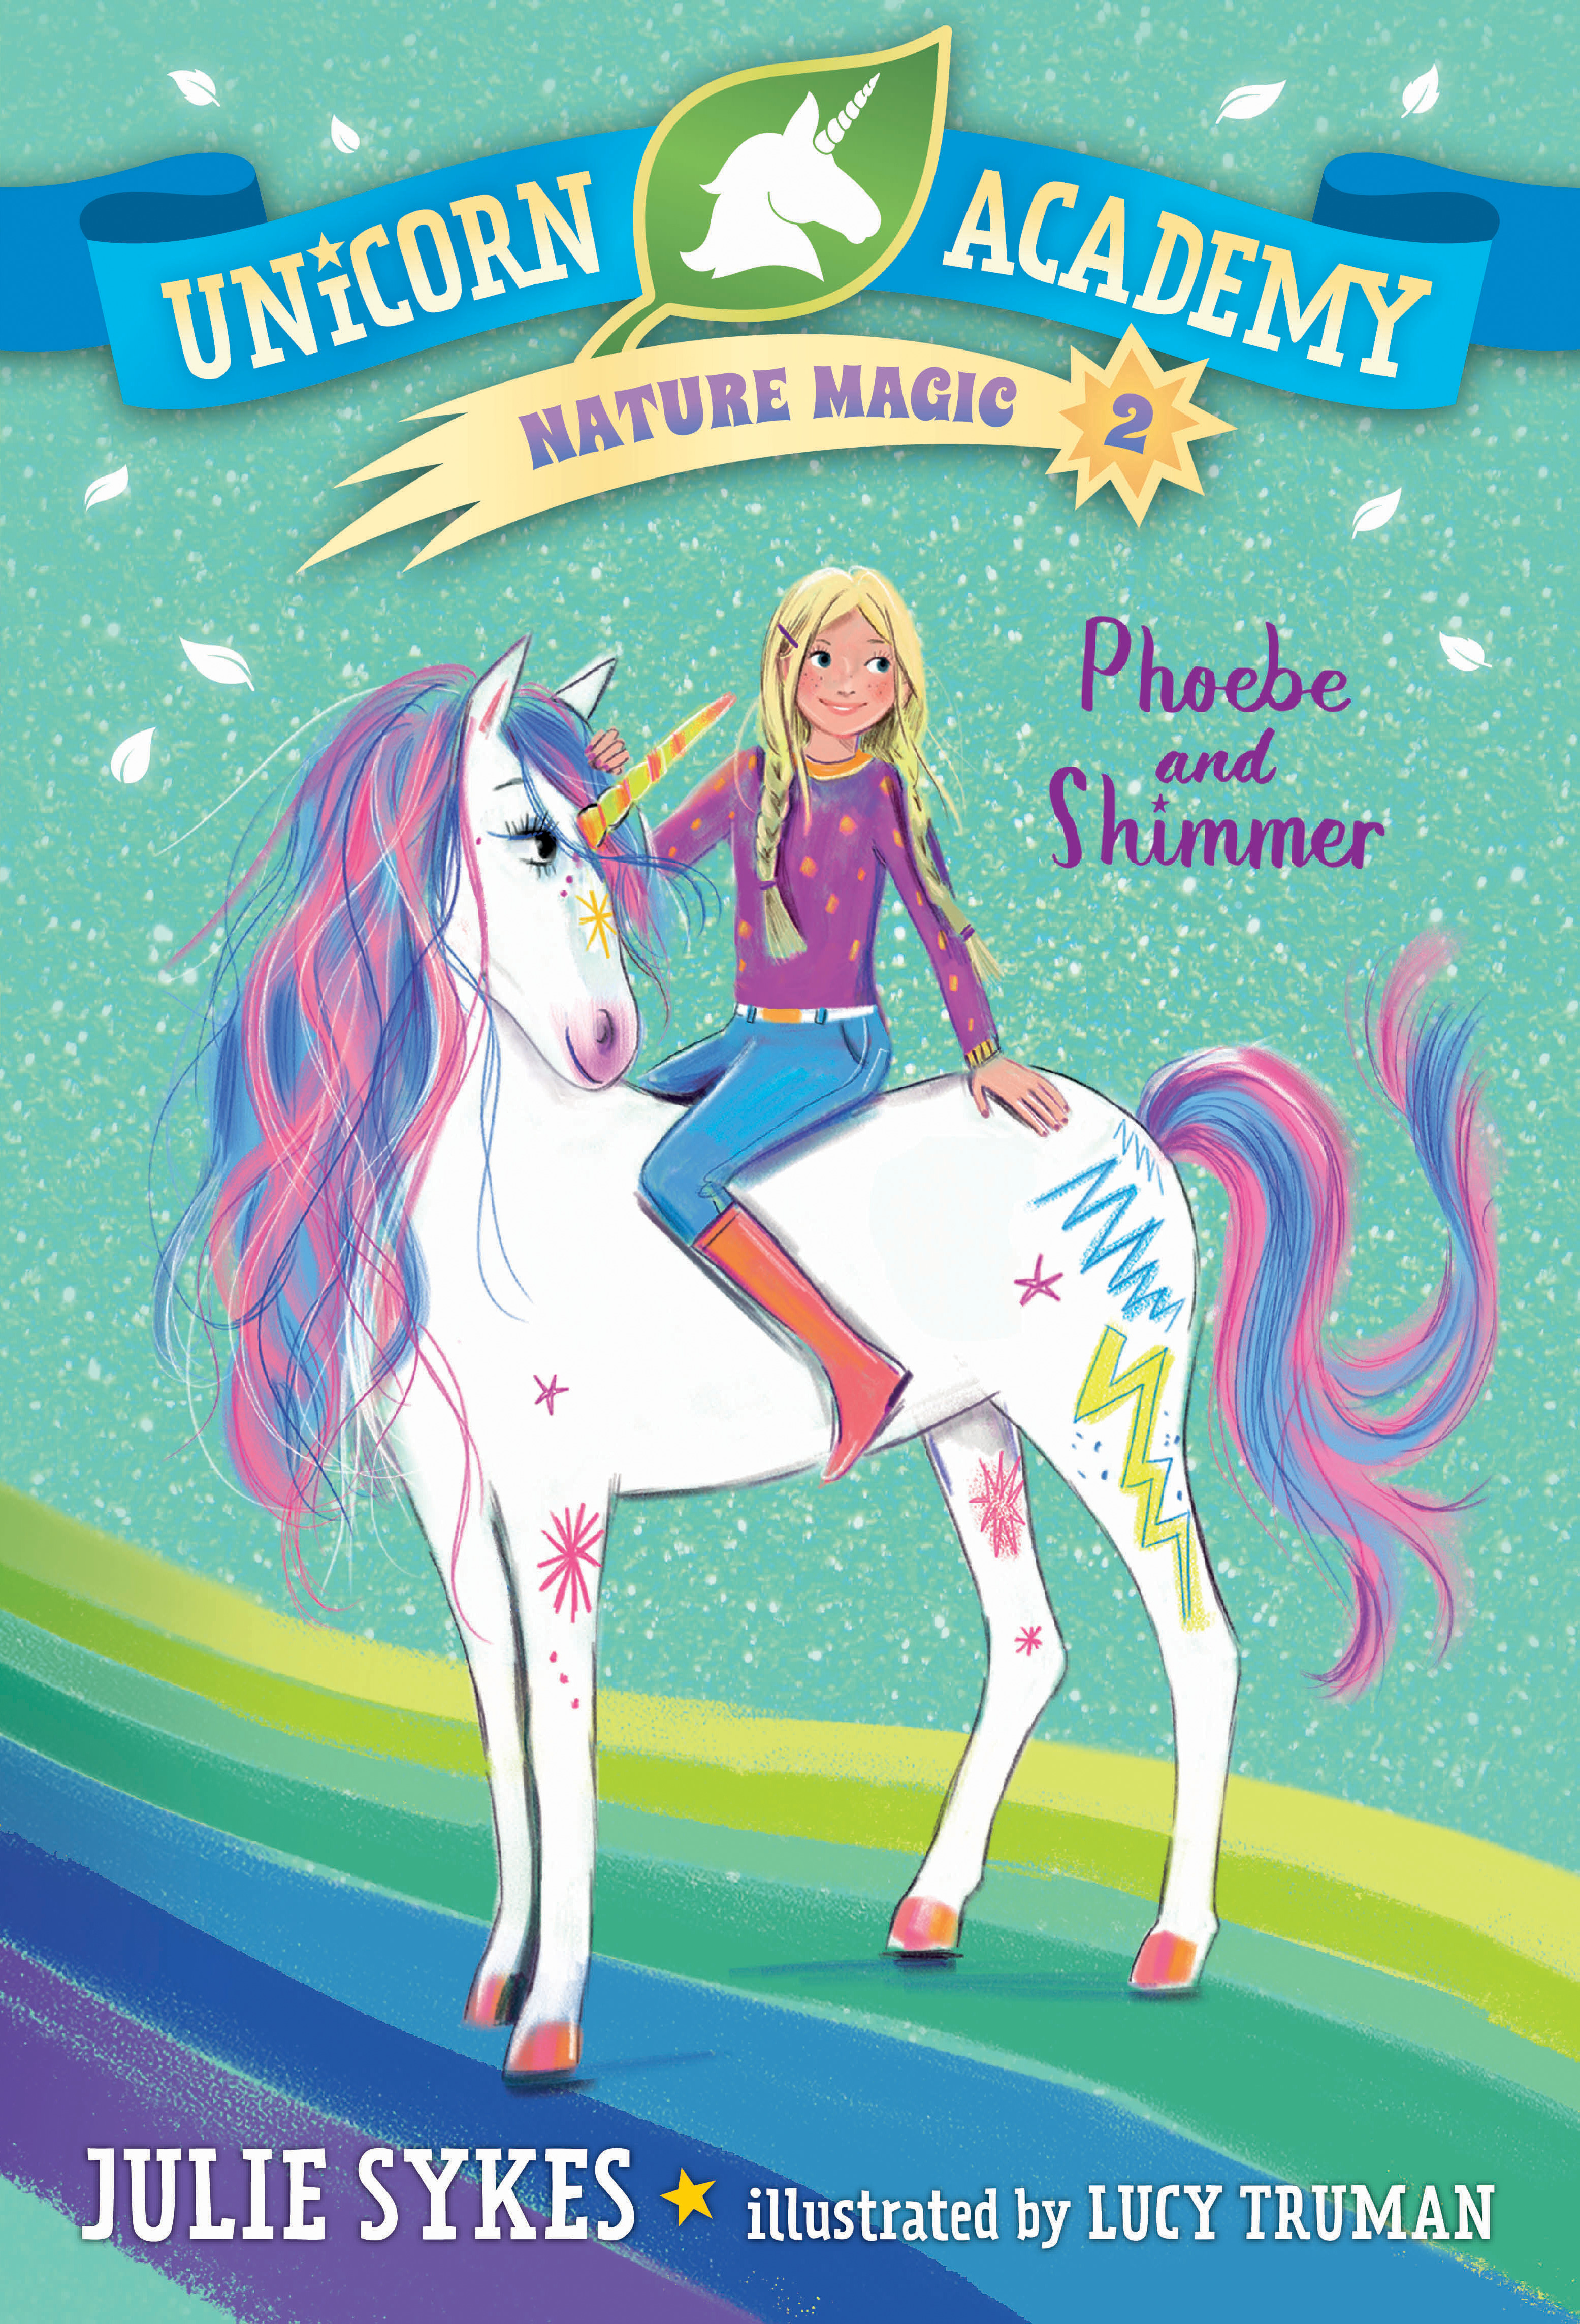 Unicorn Academy Nature Magic T.02 - Phoebe and Shimmer | Sykes, Julie